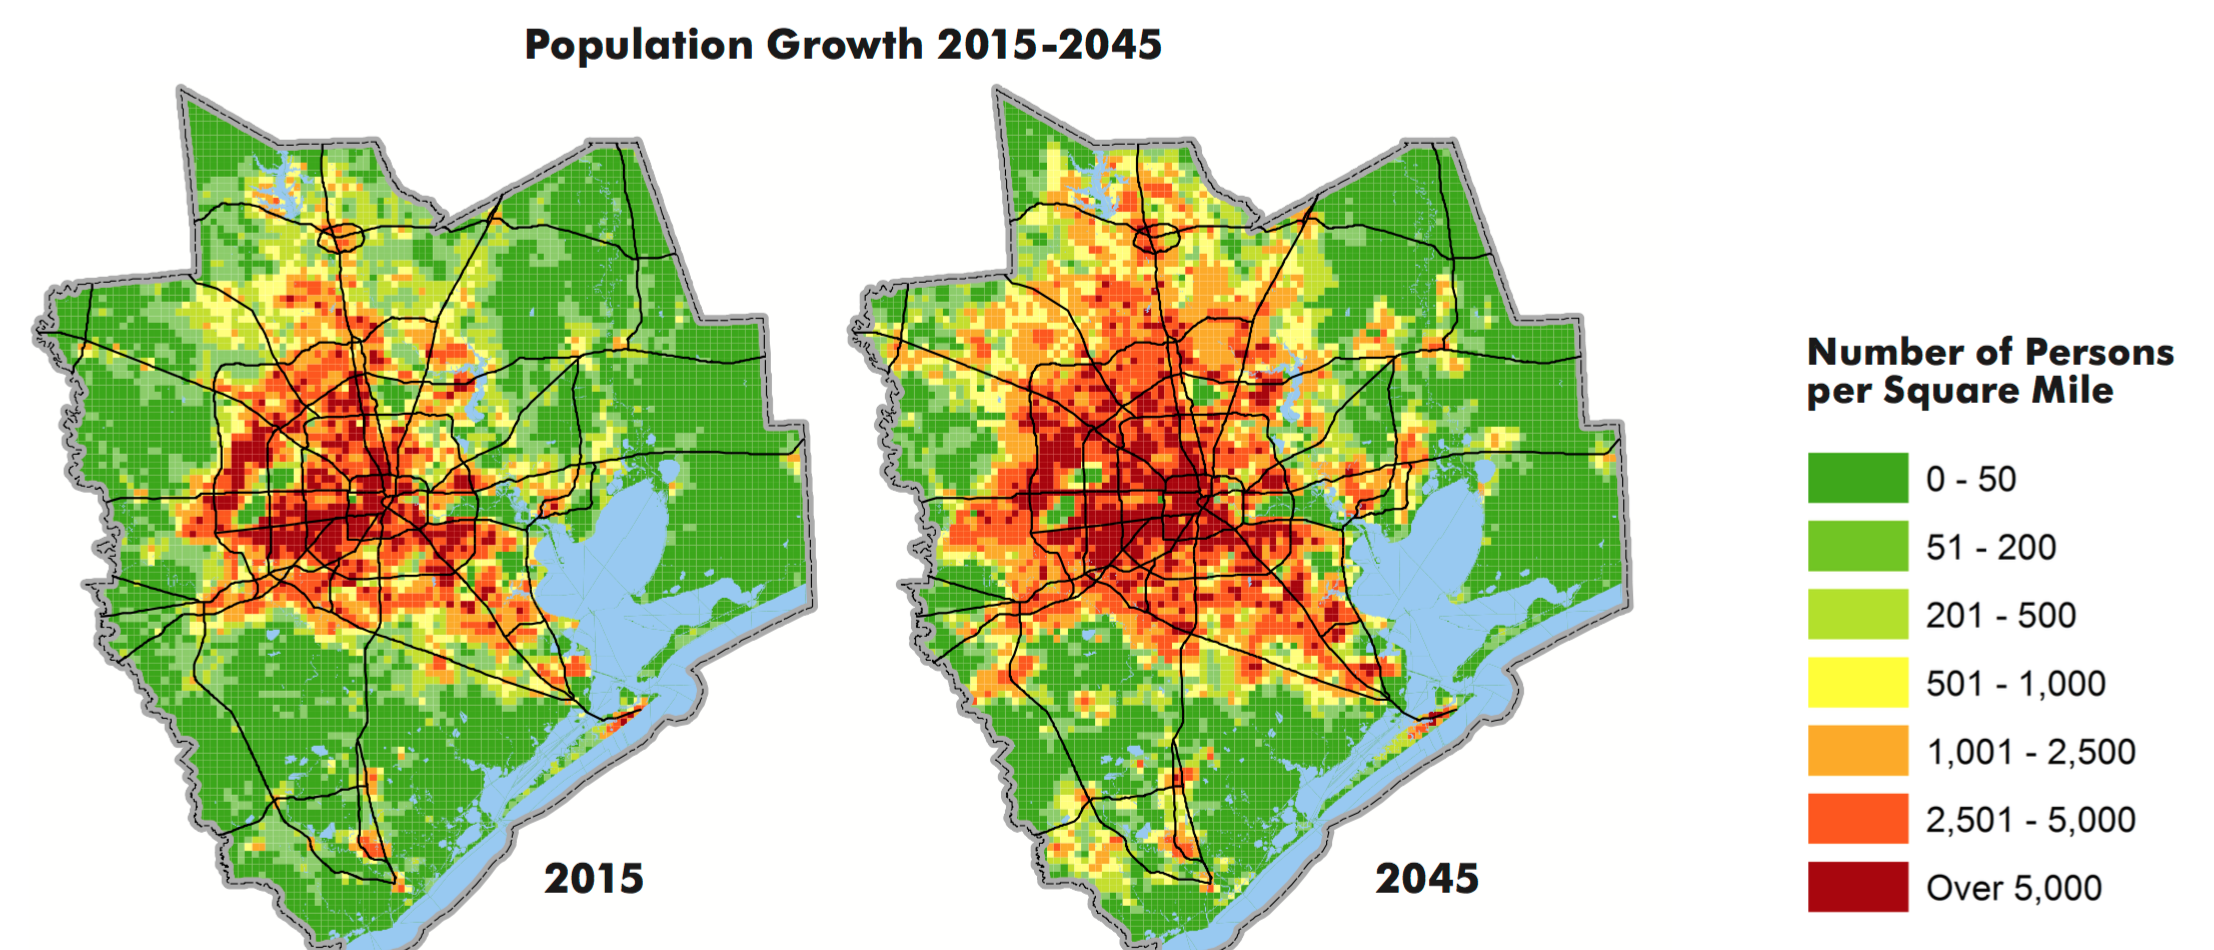 Houston population growth from 2015 to 2045